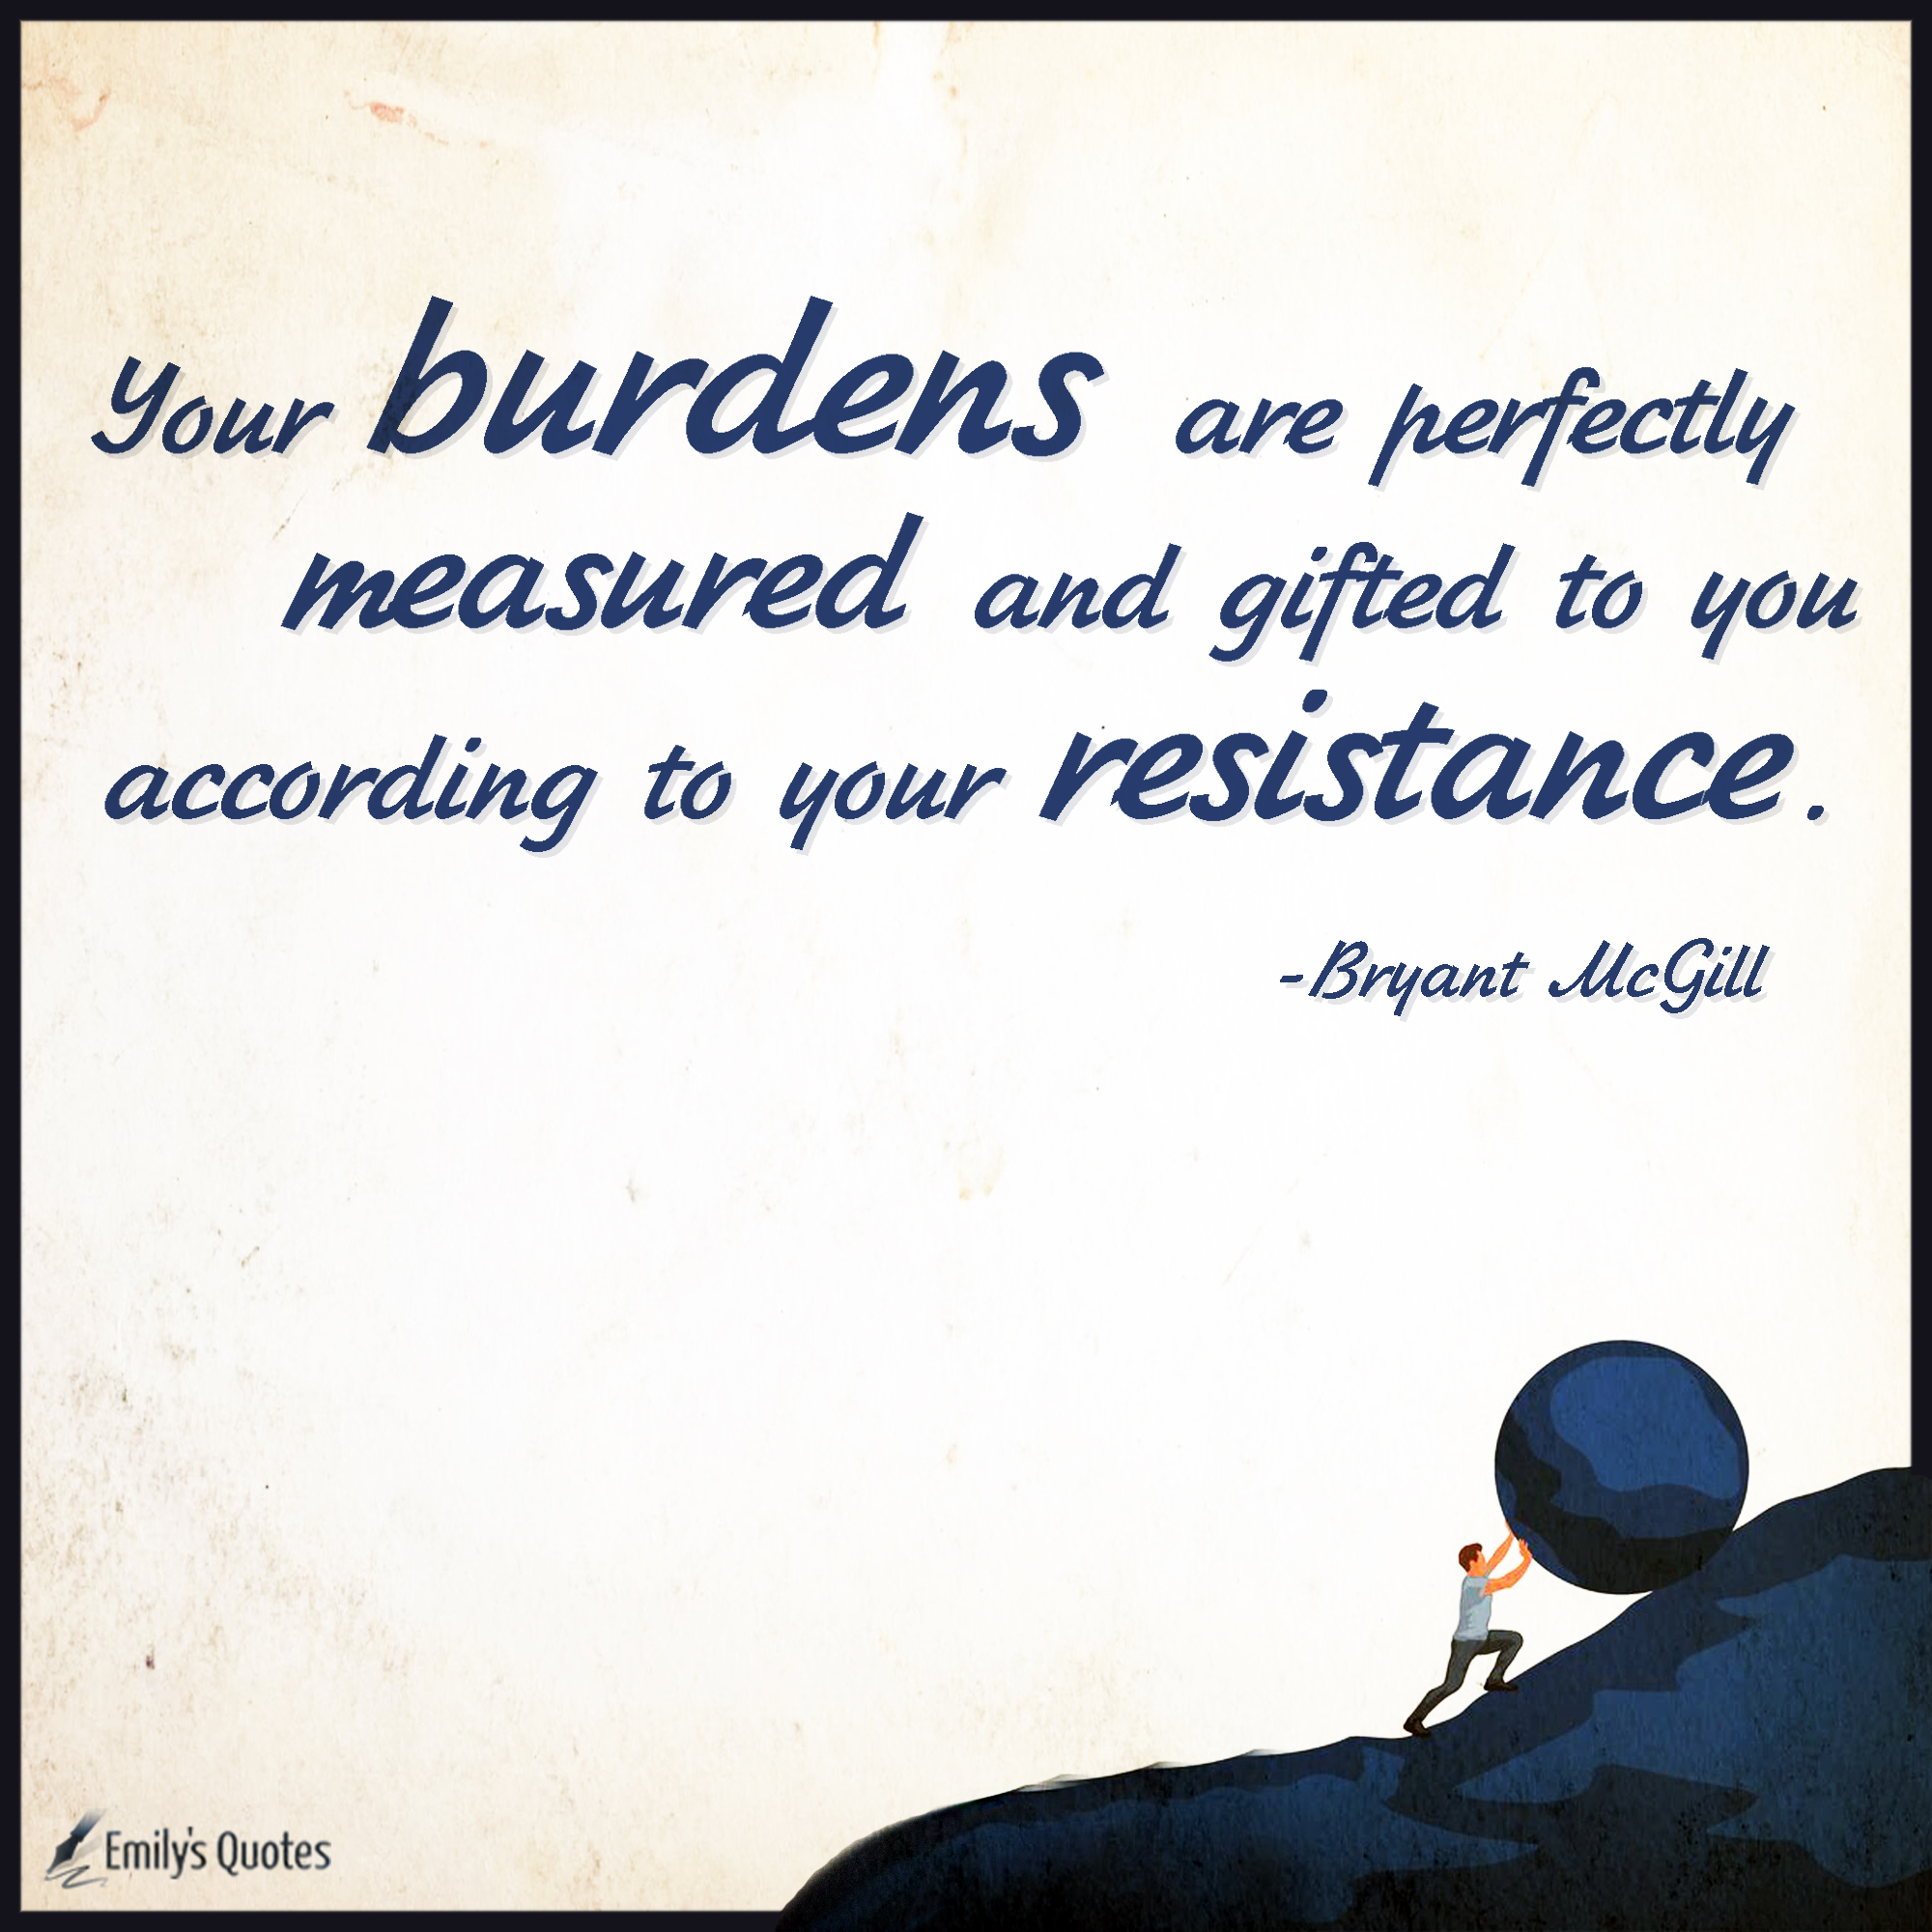 Your burdens are perfectly measured and gifted to you according to your resistance